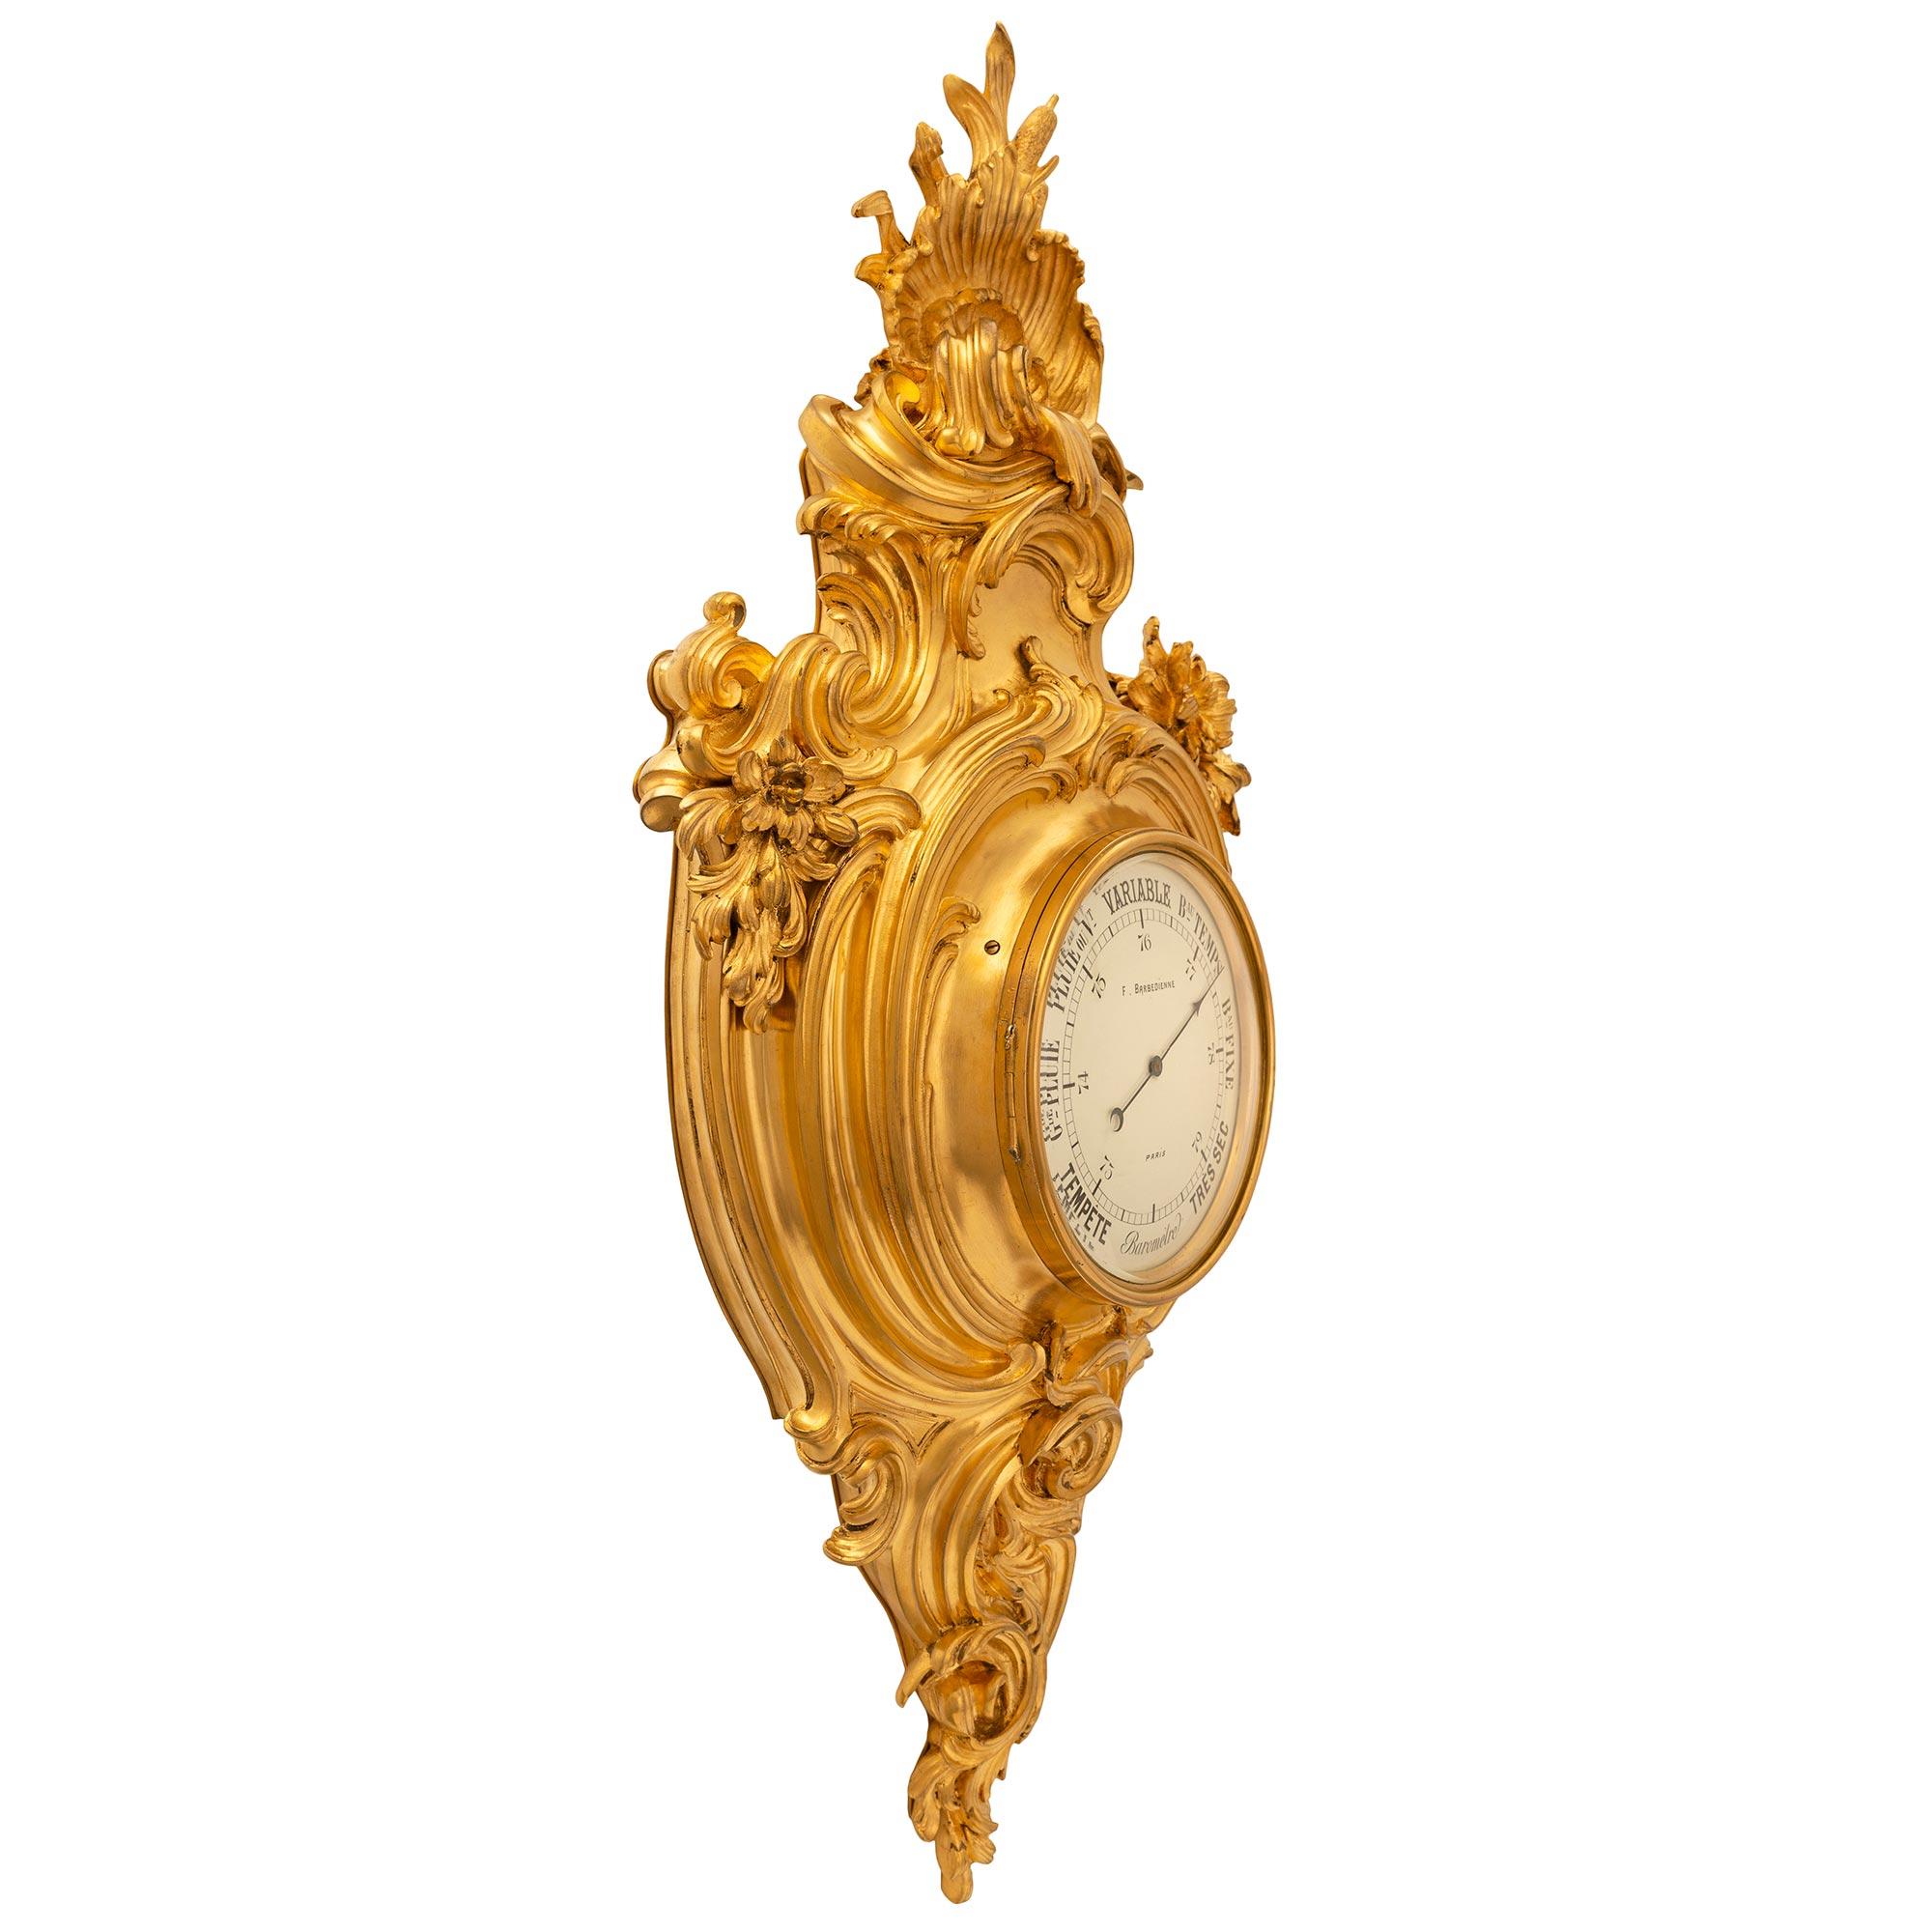 A stunning and extremely high quality French 19th century Louis XV st. ormolu wall mounted clock and barometer signed by Barbedienne. Each is set in an exquisite ormolu case with magnificent scrolled reeded foliate movements in a striking satin and